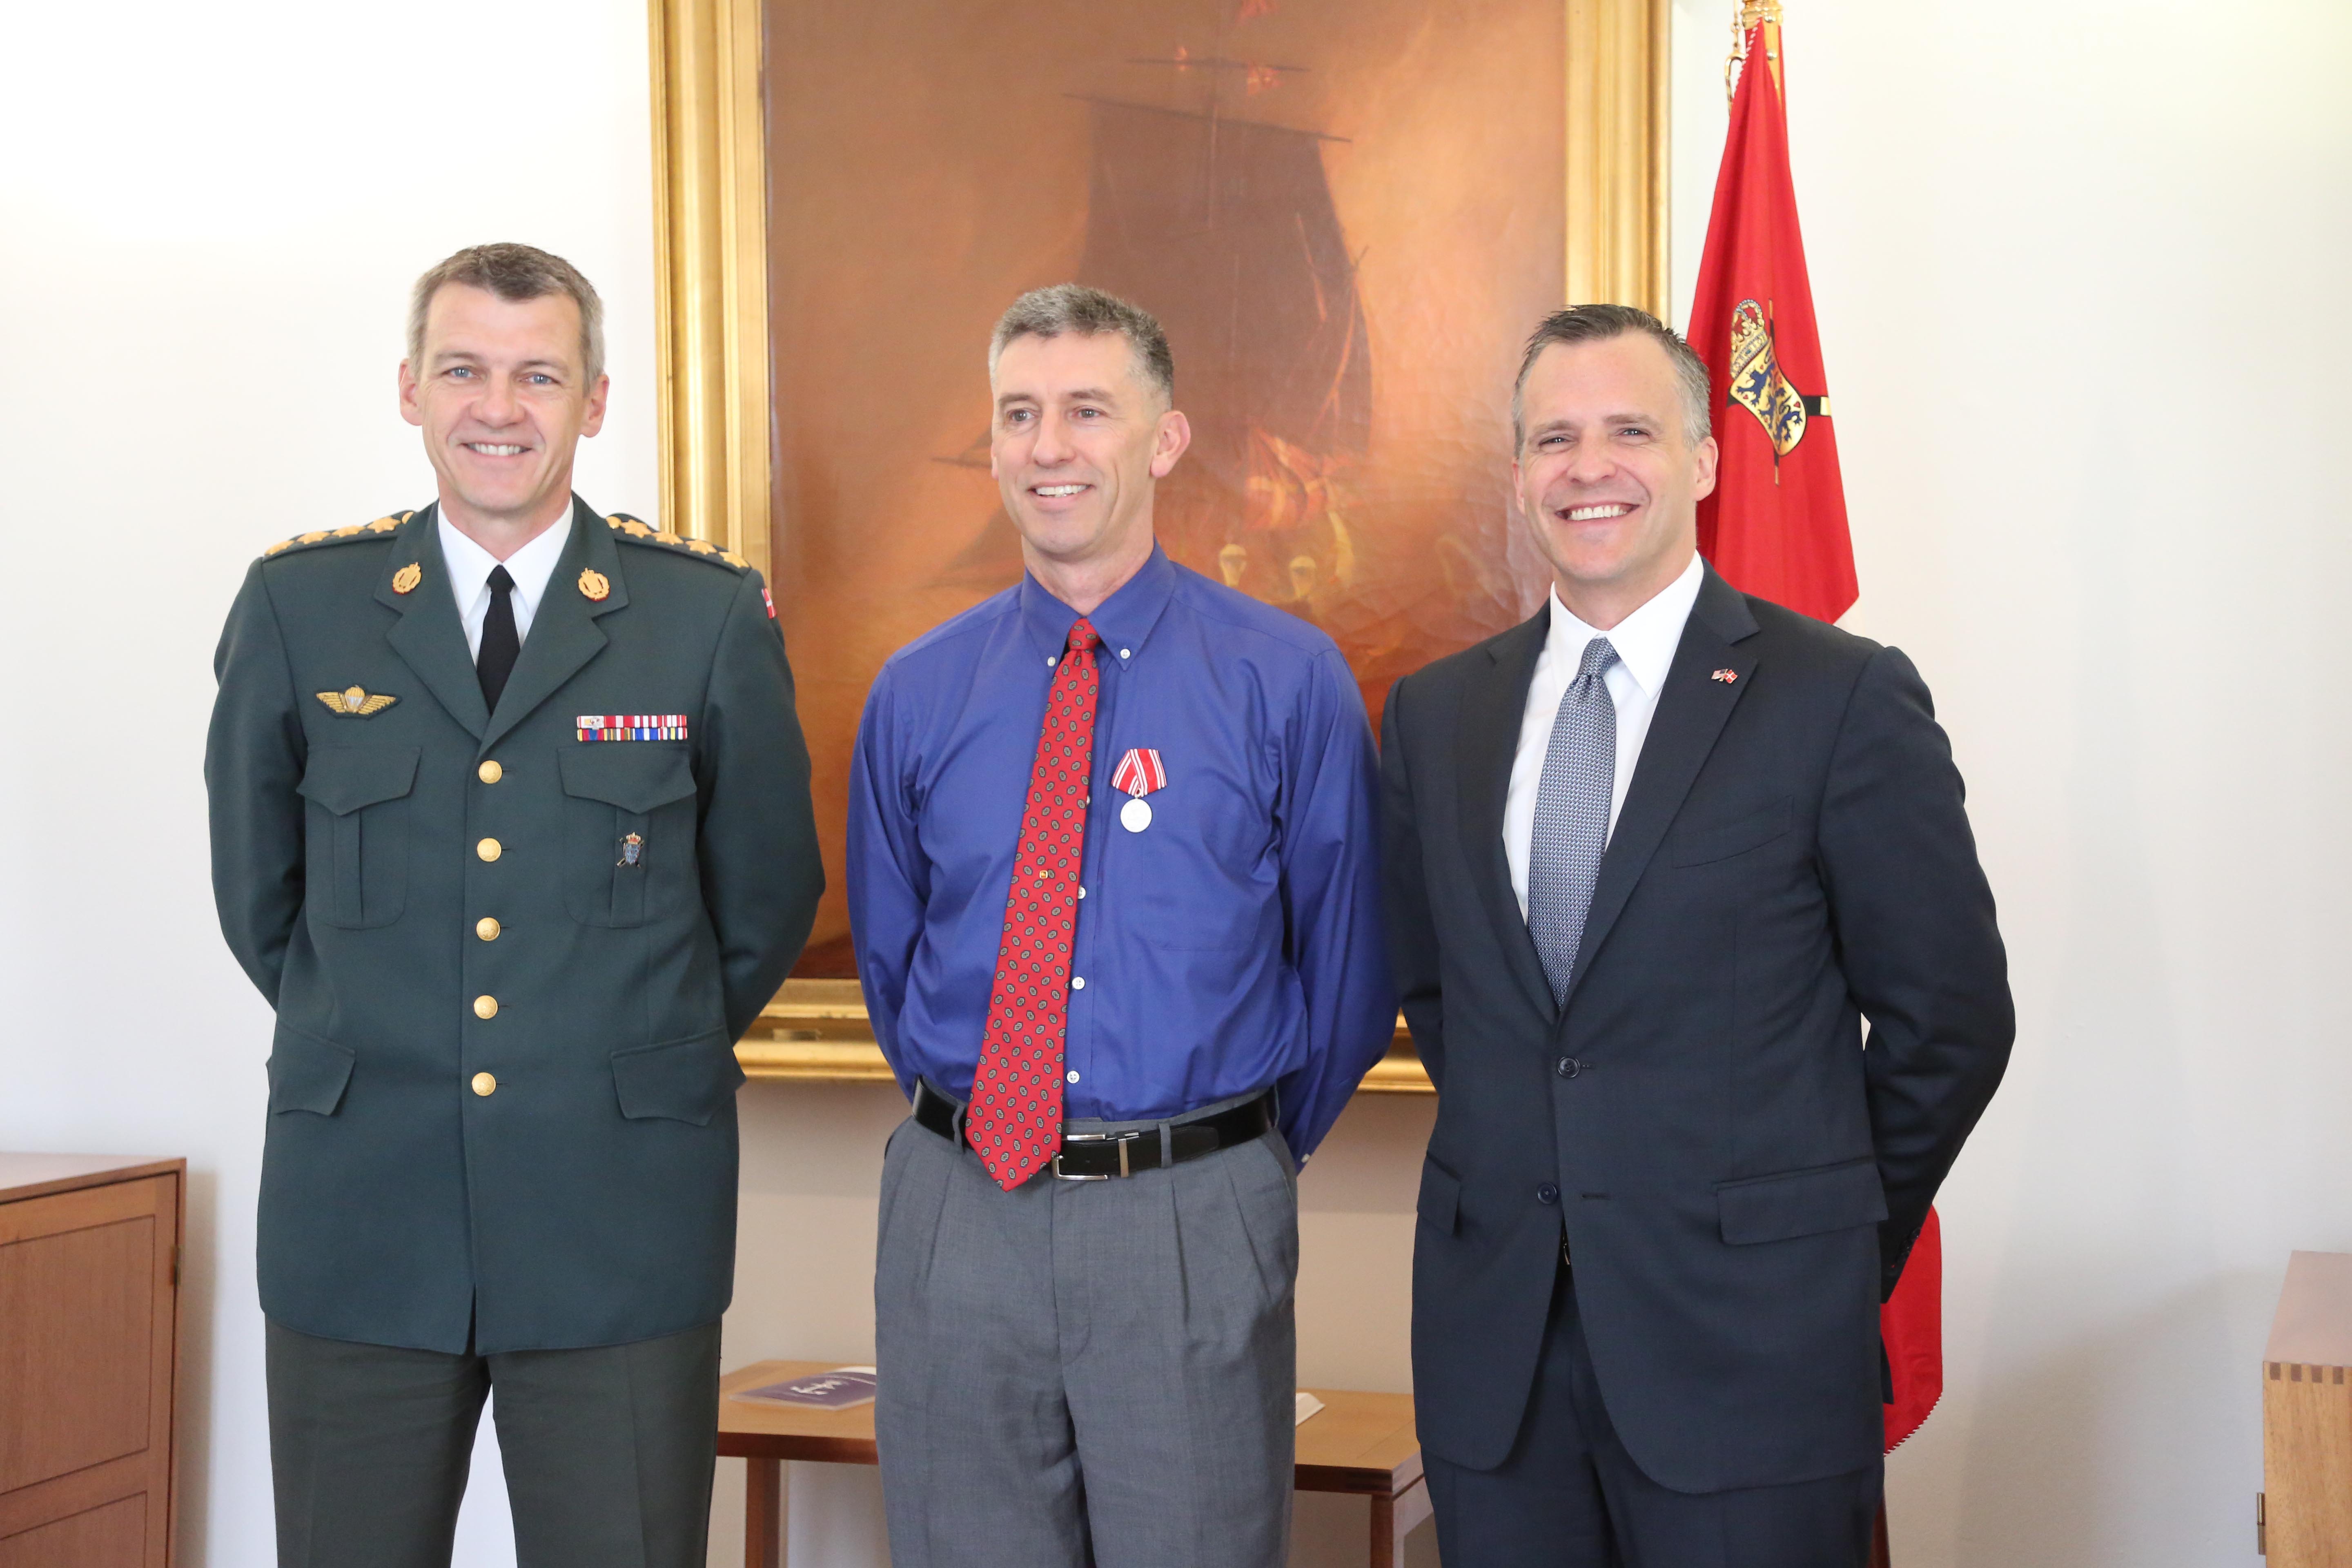 CAPTION:  Capt. Bradley Grimm, center,Texas Army National Guard, receives the Danish Defense Medal for Special Meritorious Efforts by Danish Defense Gen. Peter Bartram, left, and American ambassador to Denmark Rufus Gifford, right, at a ceremony held in Denmark, April 19, 2016.  Grimm was instrumental in foiling a terrorist plot to bomb a Danish school and assisted Danish security forces in making an arrest. (Danish Military photo by Sune Wadskjær/Released)